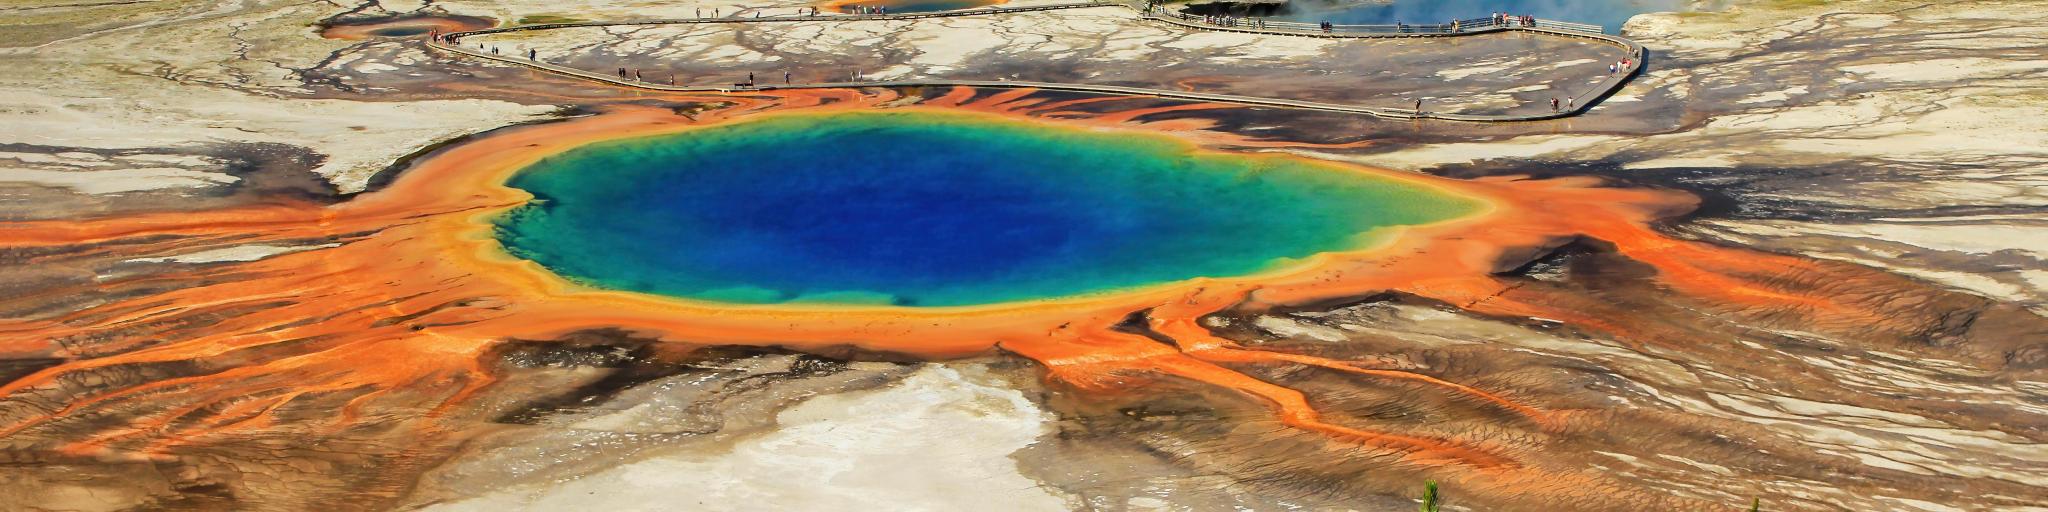 Aerial view of the famous Grand Prismatic Spring